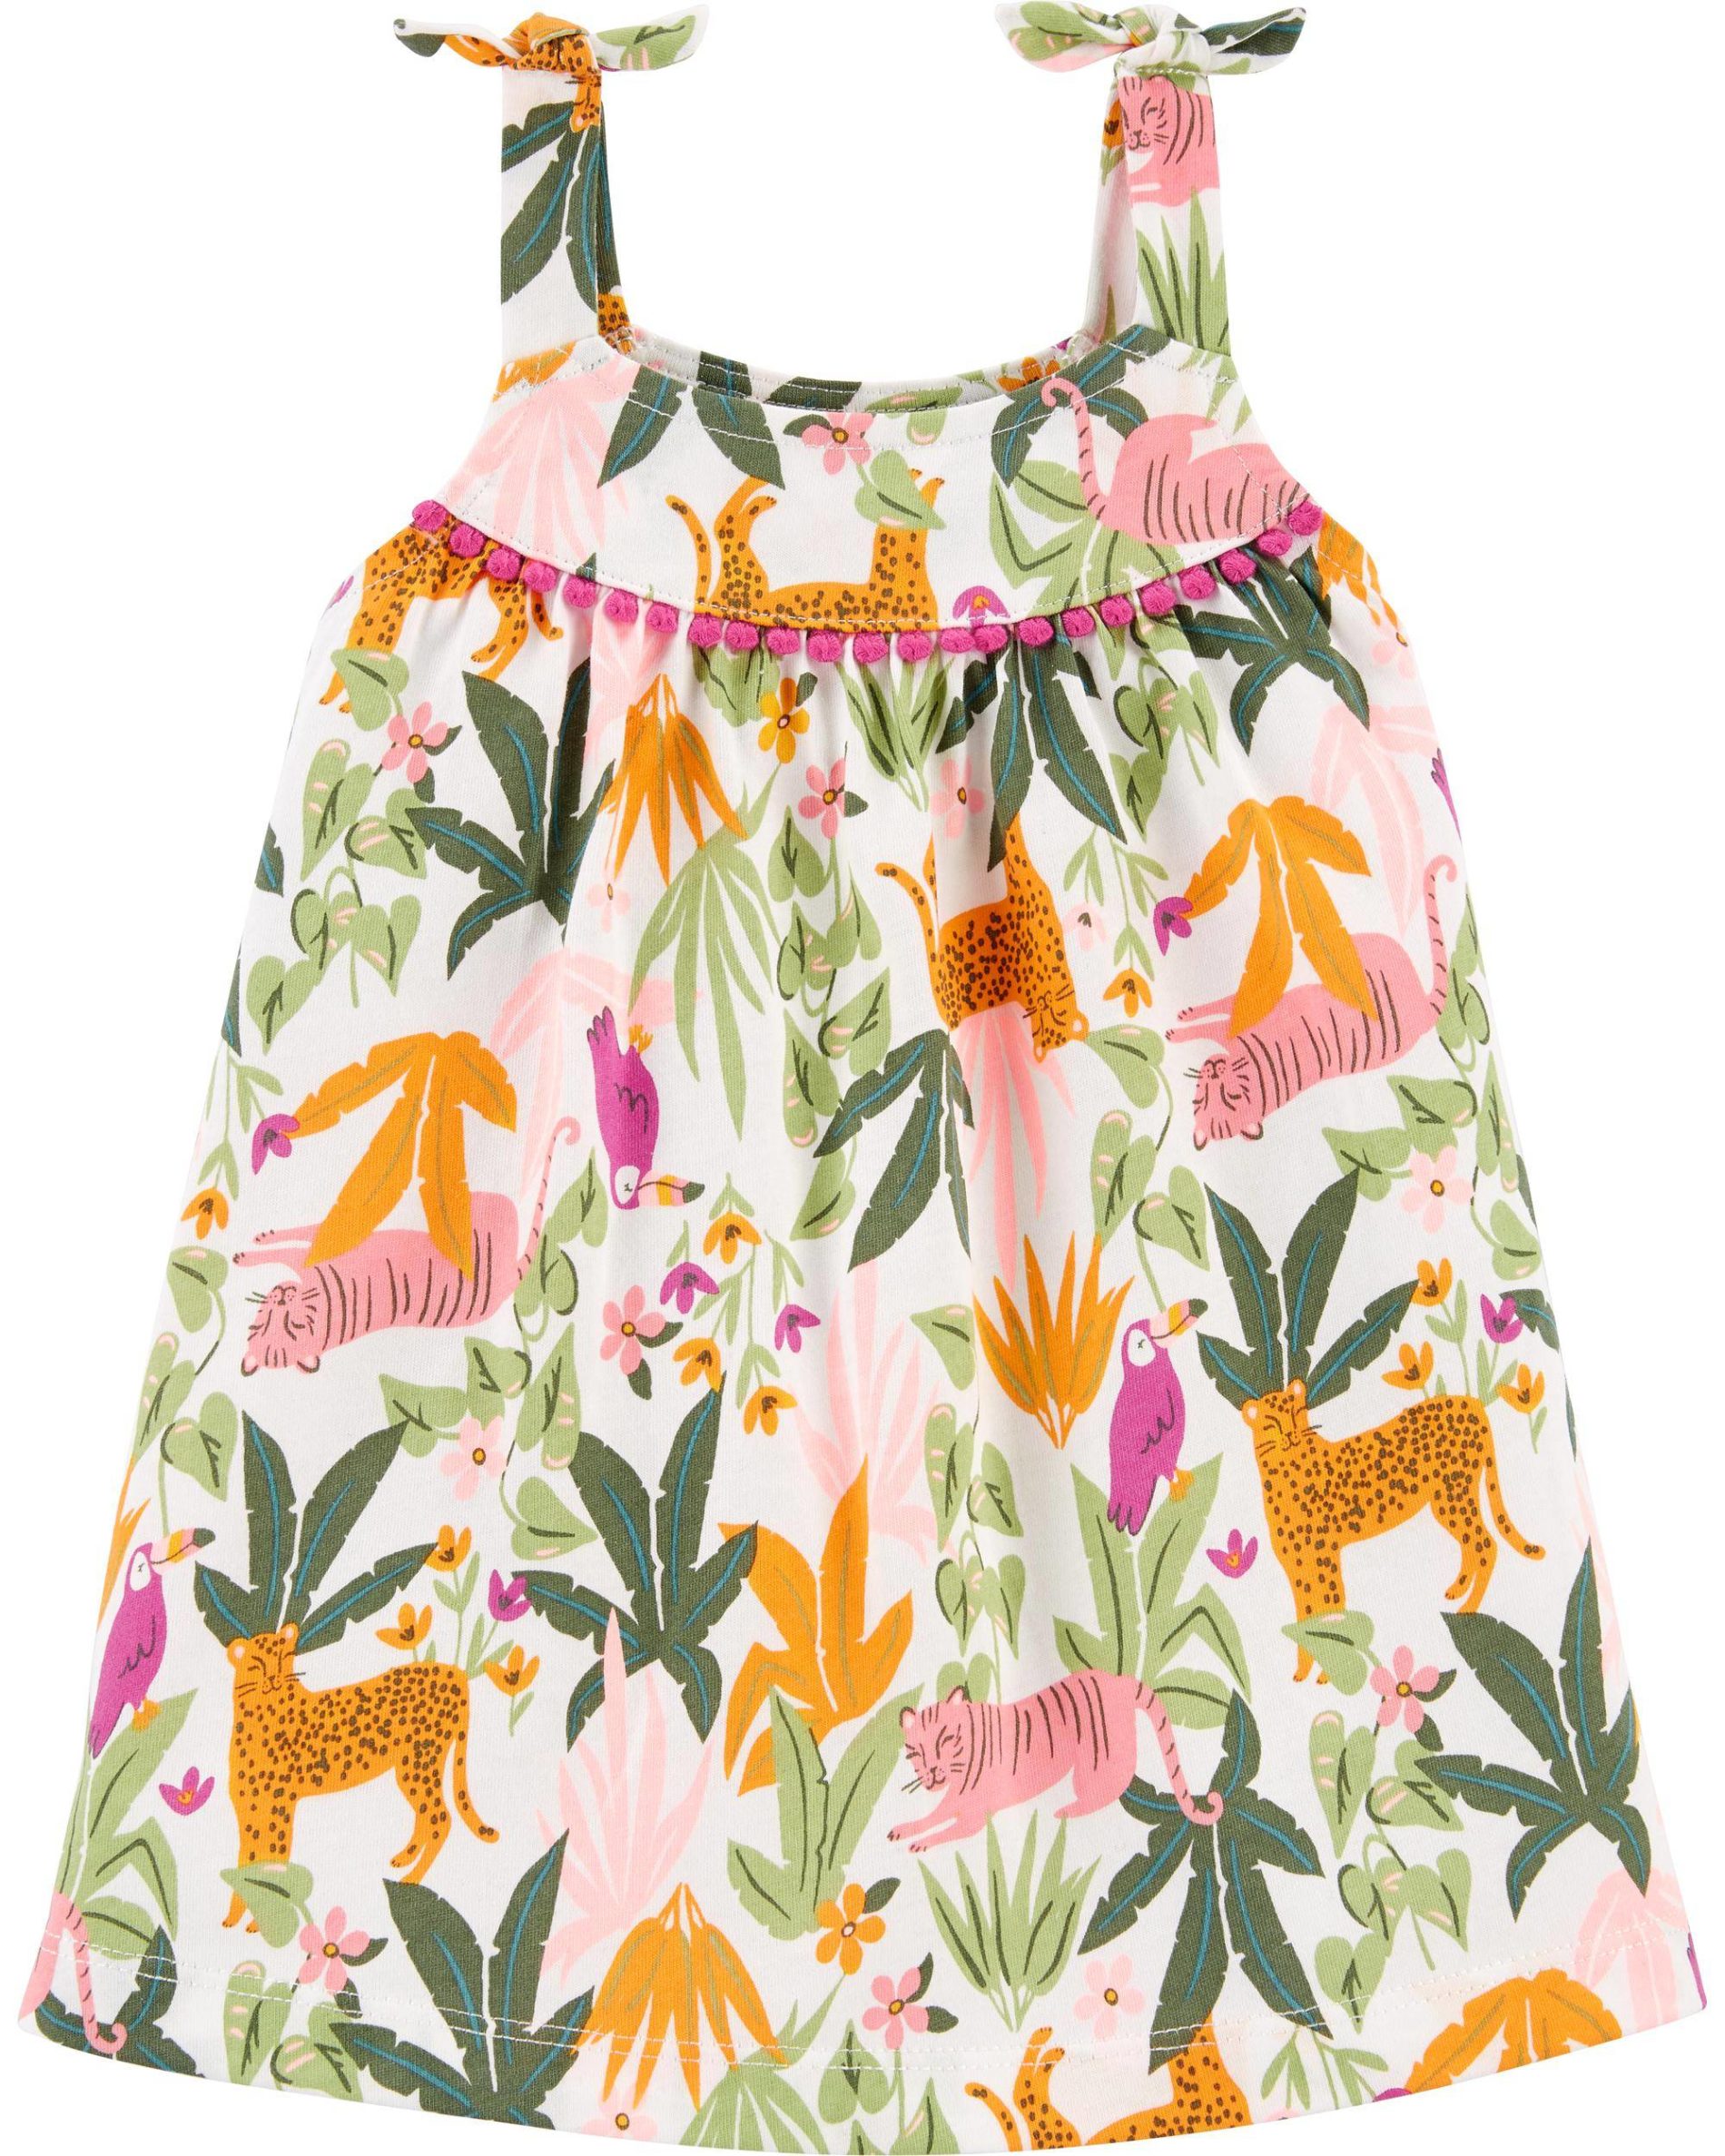 57 Baby dresses with nature-themed prints for summer - The Mood Guide